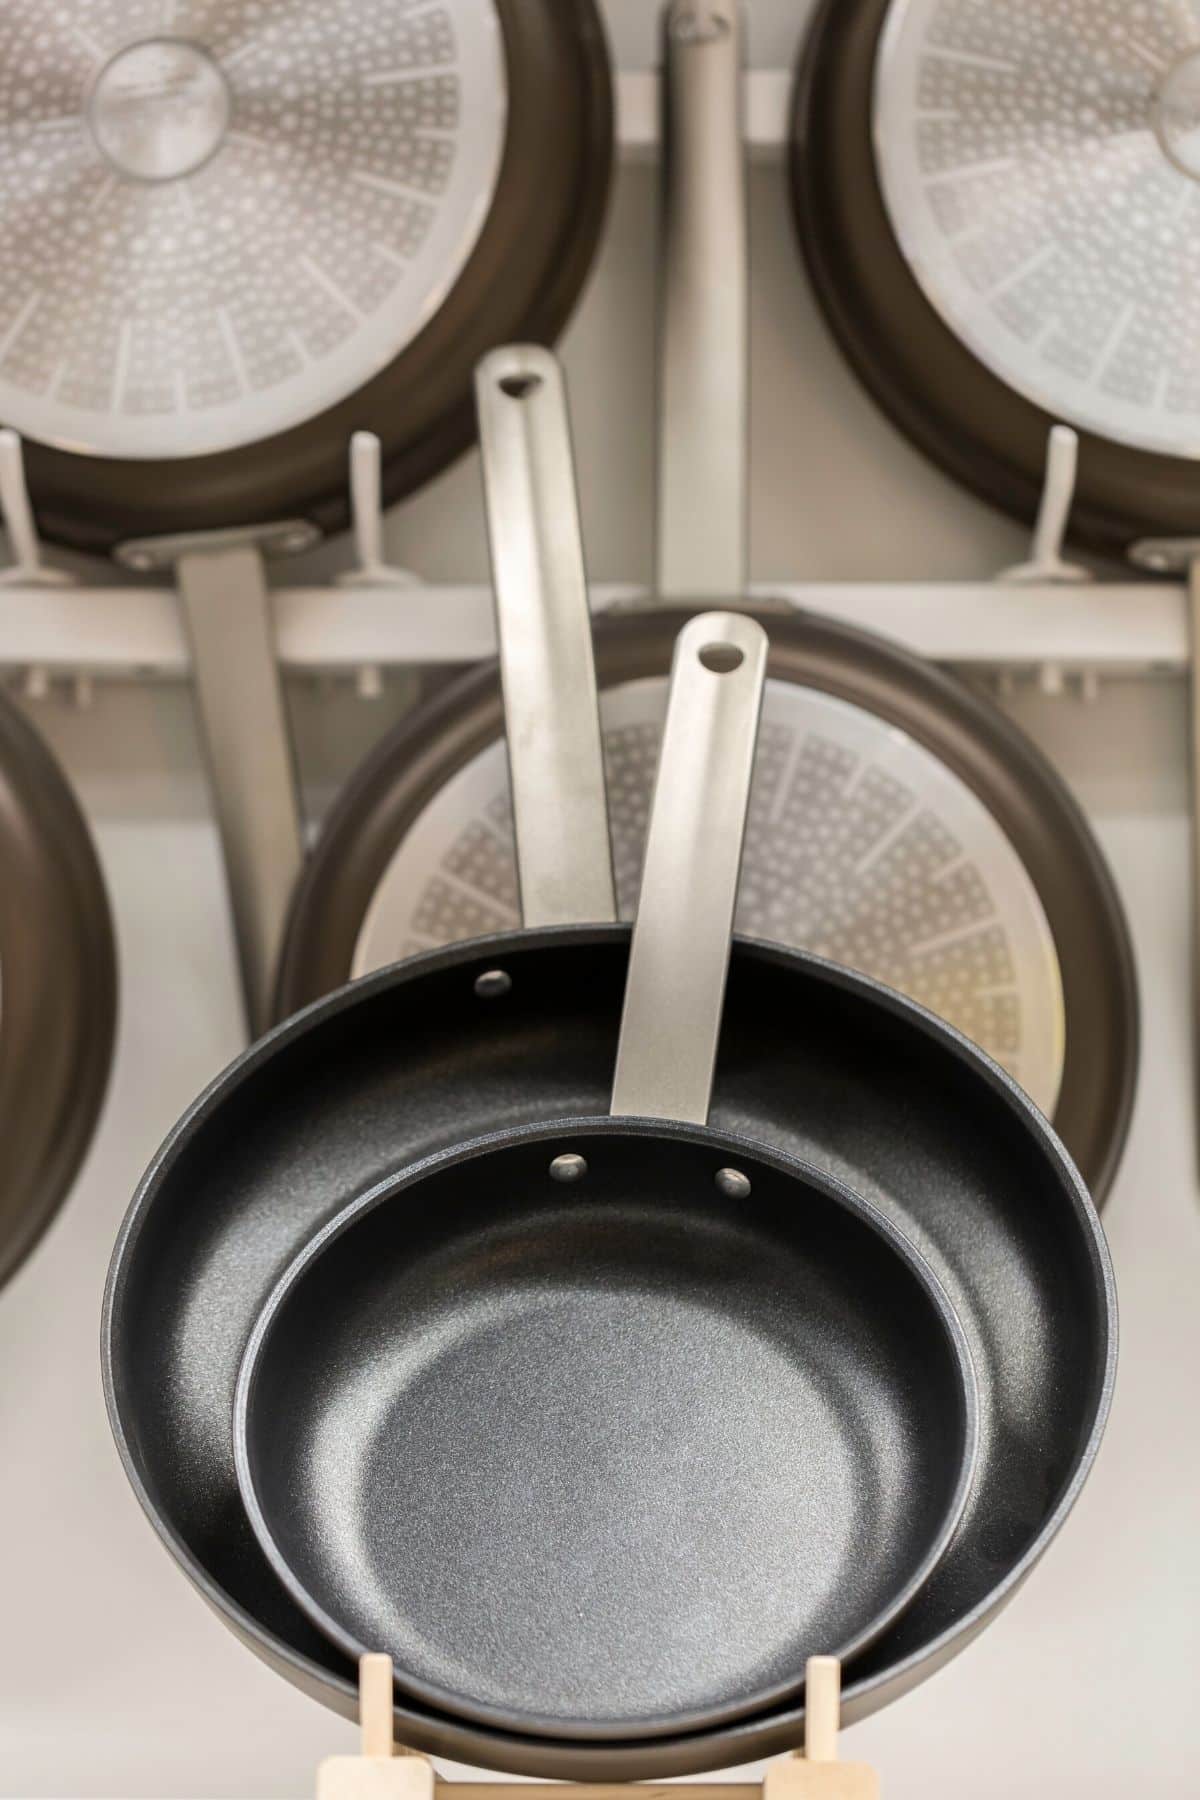 Types Of 'Safe' Cookware You Should Be Using - Workingmum Diary